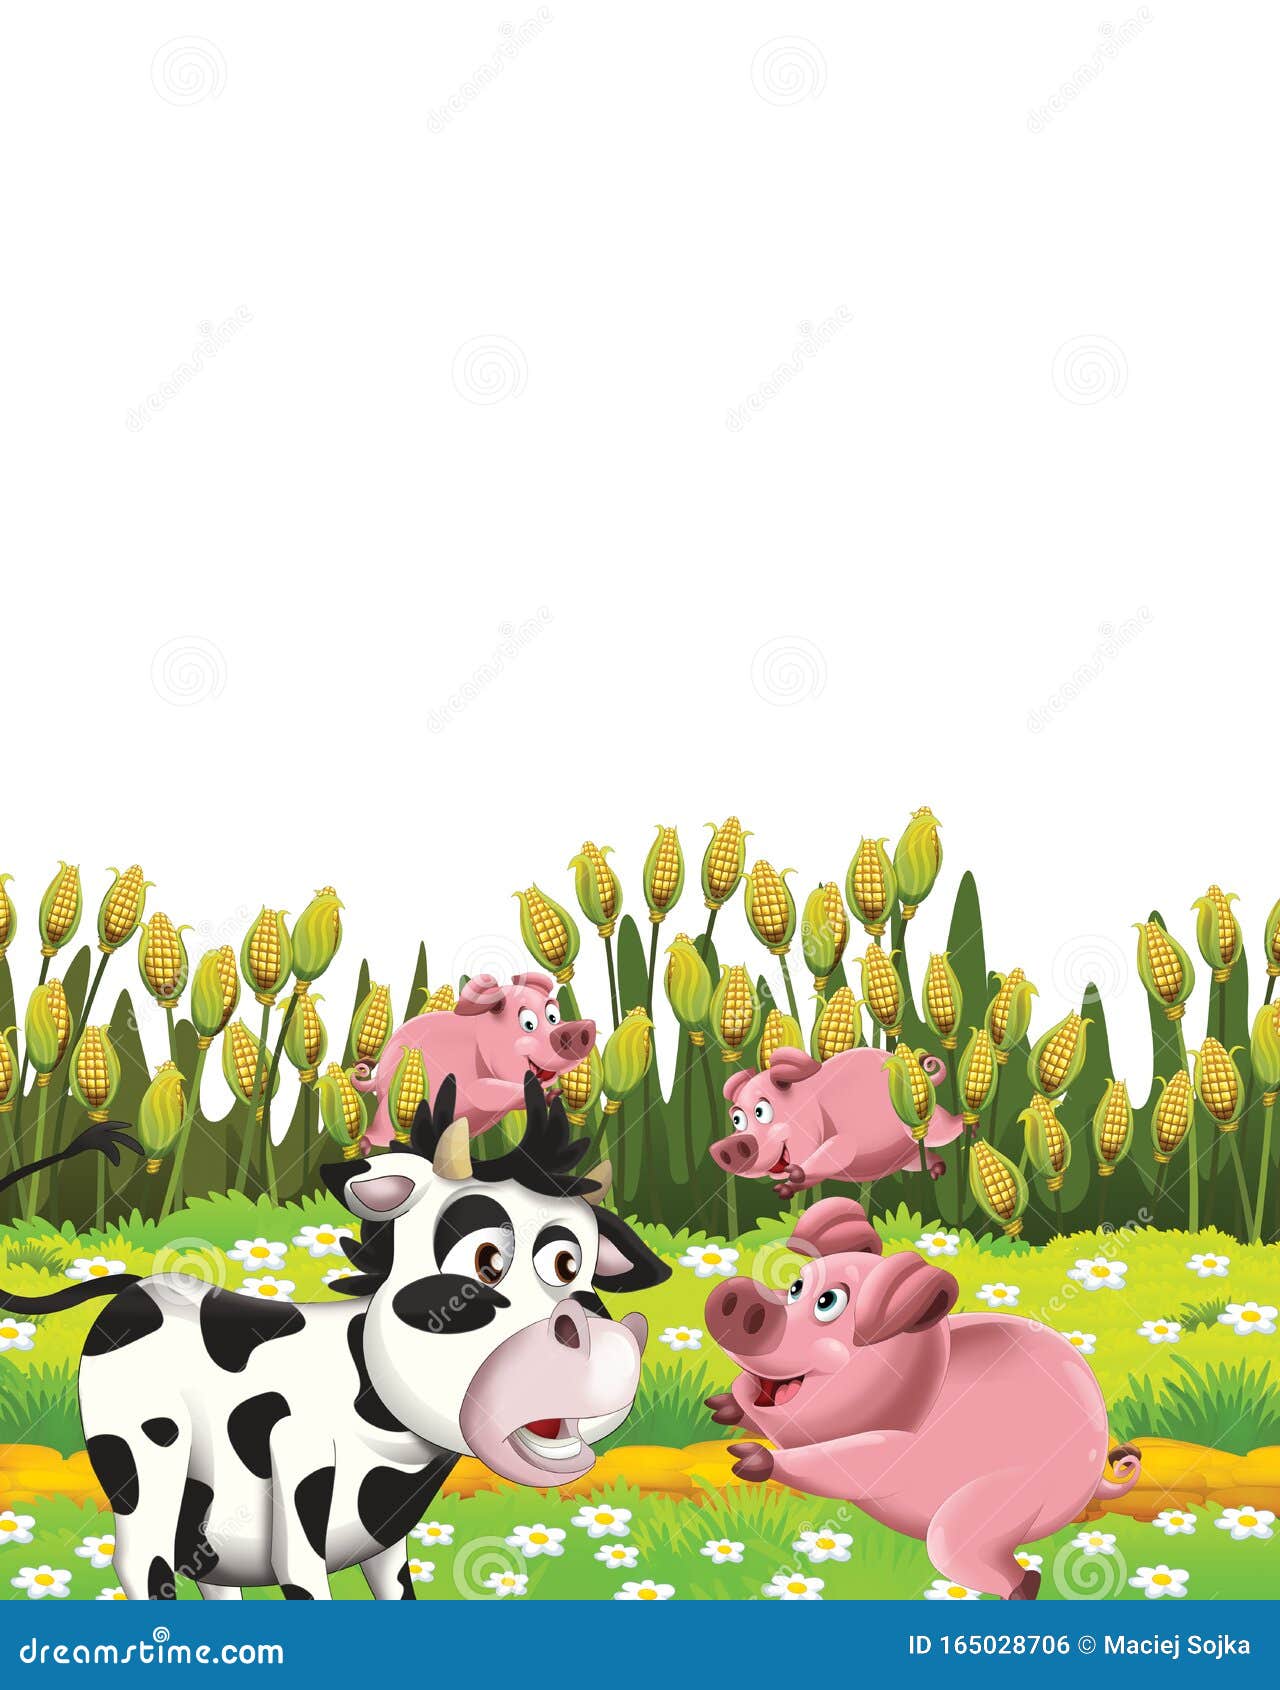 Cartoon Scene with Cow and Pig on a Farm Having Fun on White Background  Stock Illustration - Illustration of nice, design: 165028706